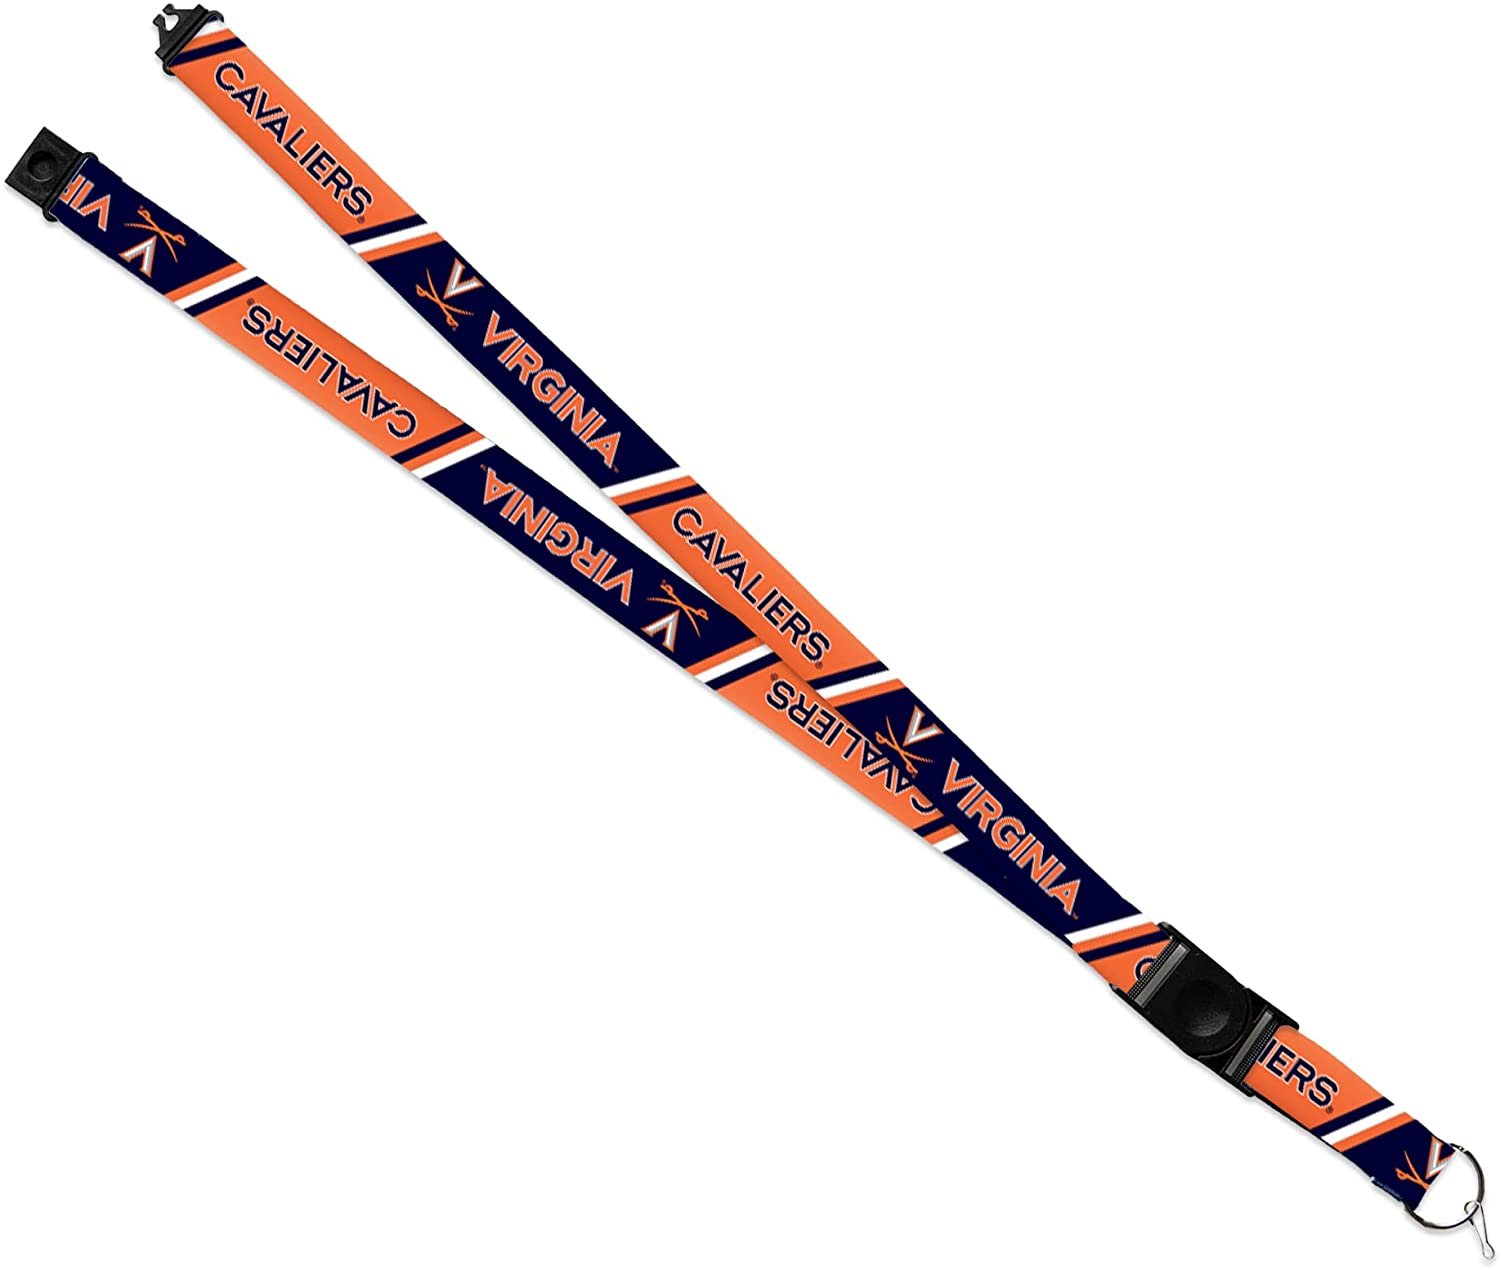 University of Virginia Cavaliers Lanyard Keychain Double Sided 18 Inch Button Clip Safety Breakaway